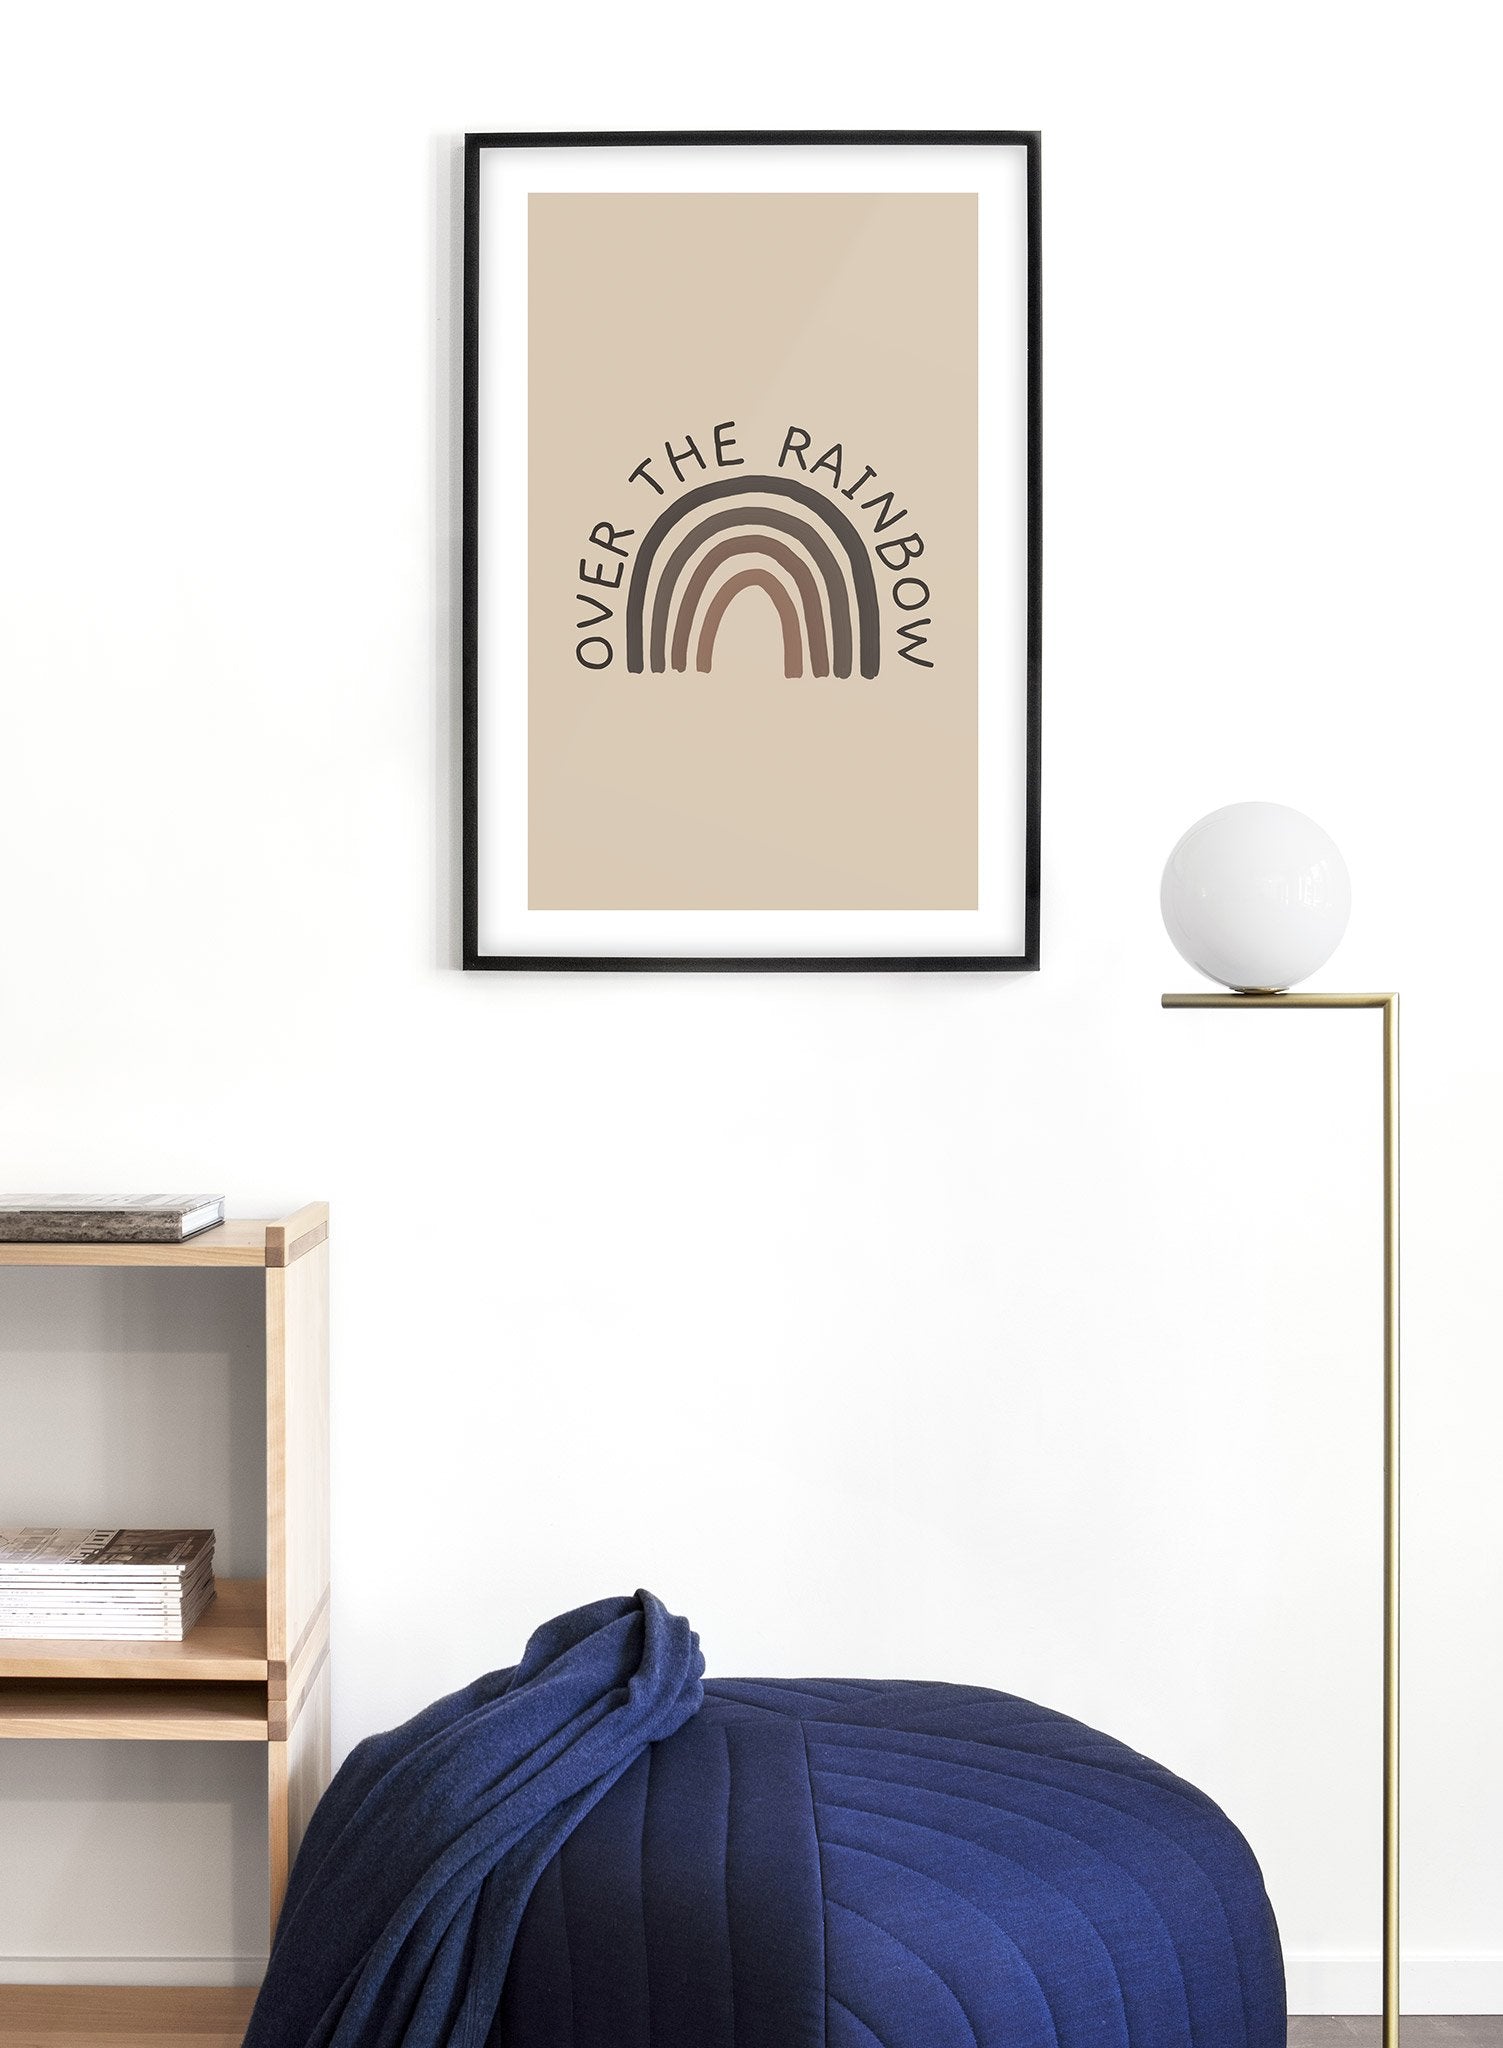 Kids nursery typography poster by Opposite Wall with Over the Rainbow quote - Lifestyle - Living Room